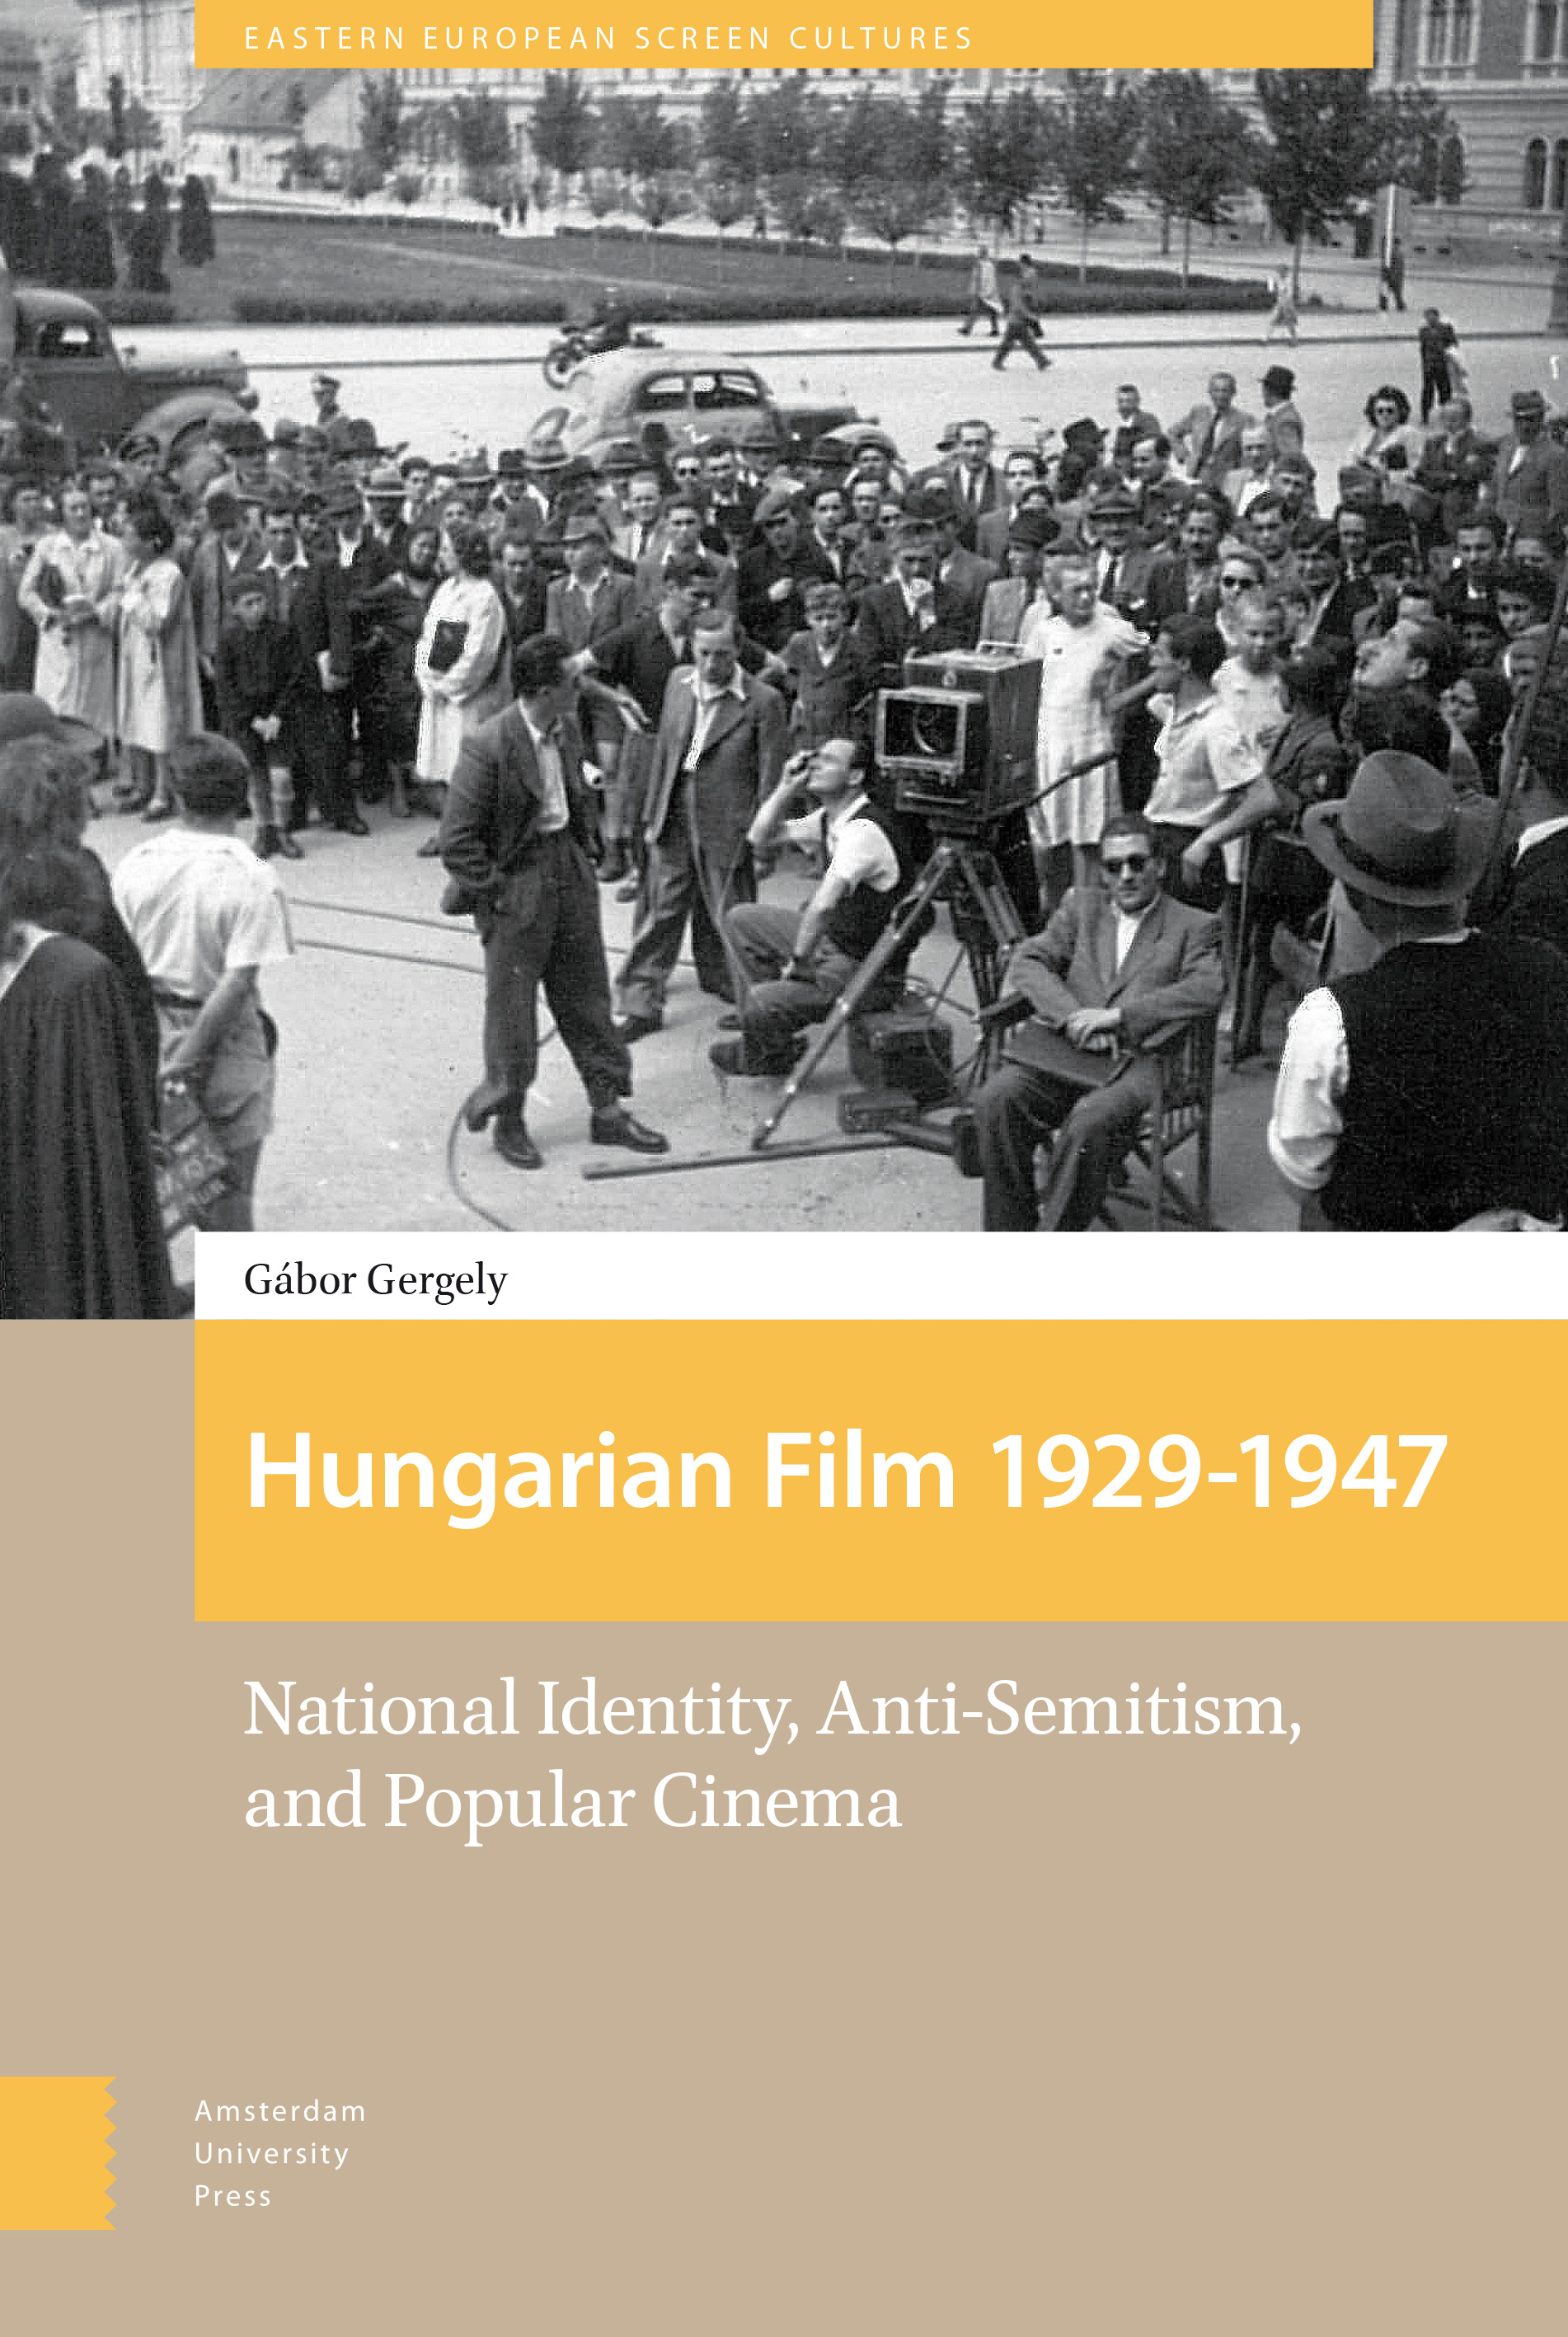 Films & Filmmakers of Hungary